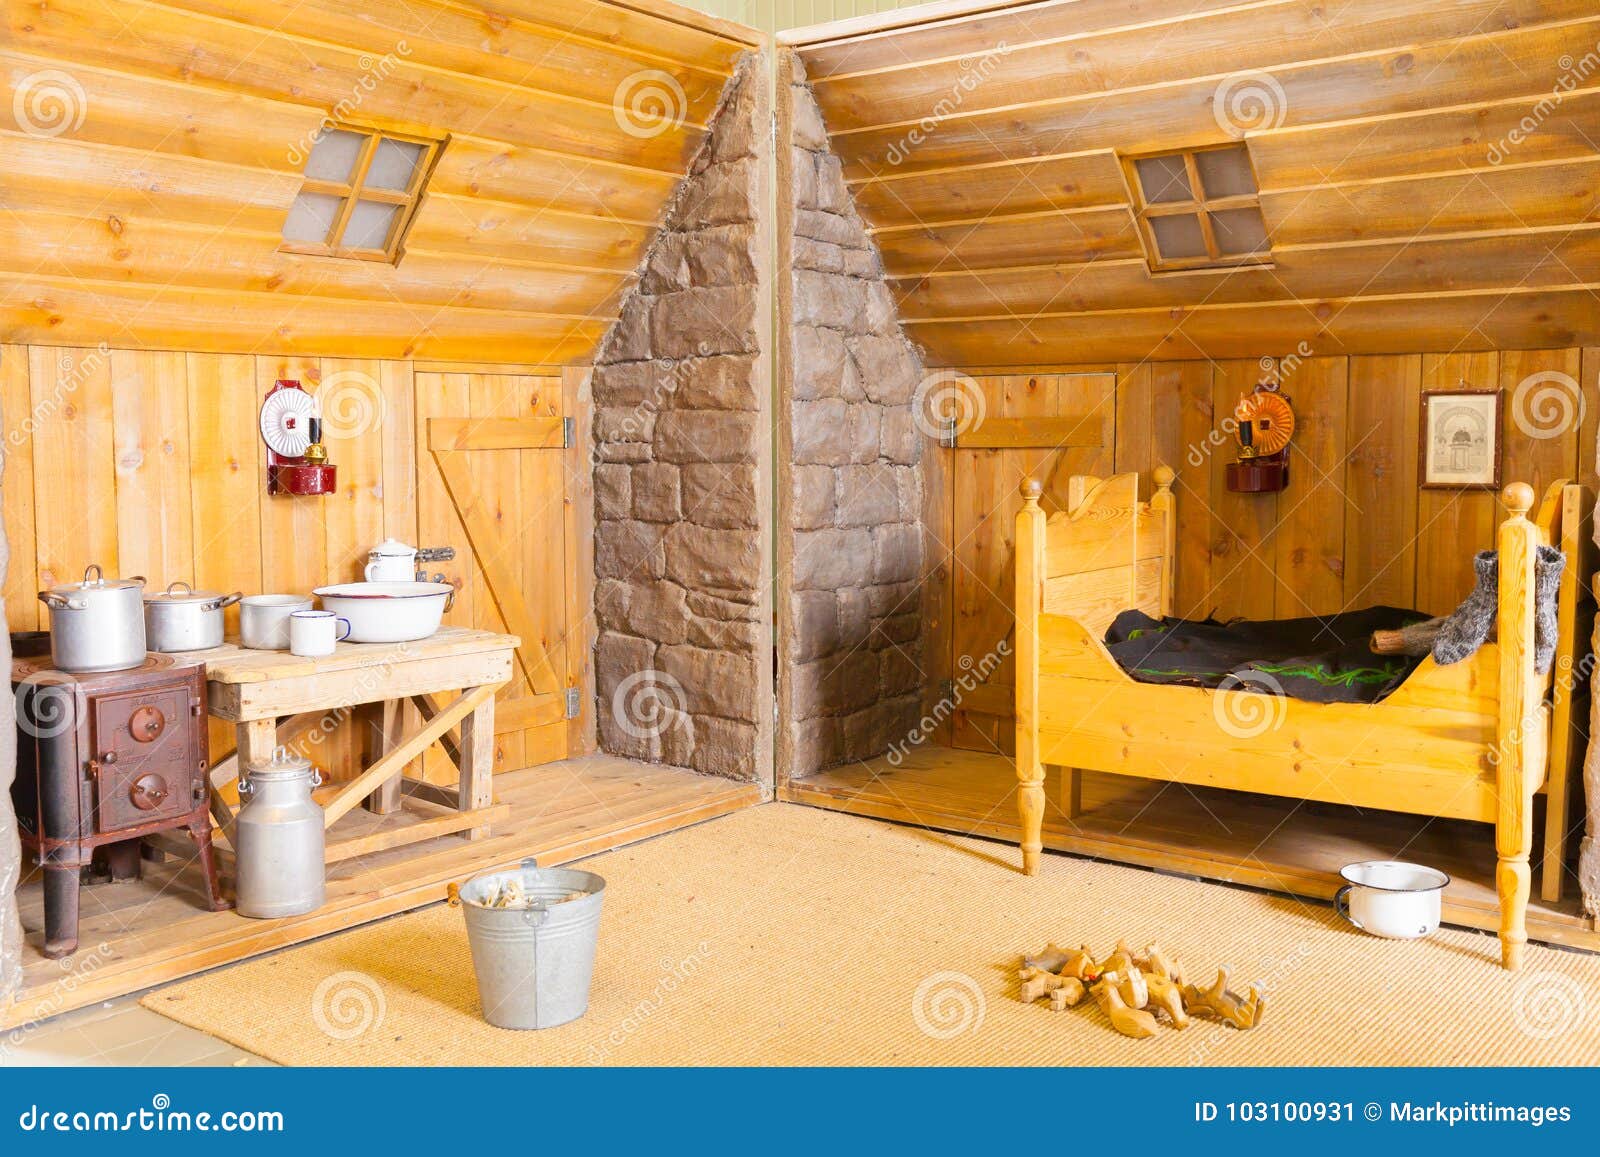 Interior Of A Bedroom Of An Old Icelandic Wooden House